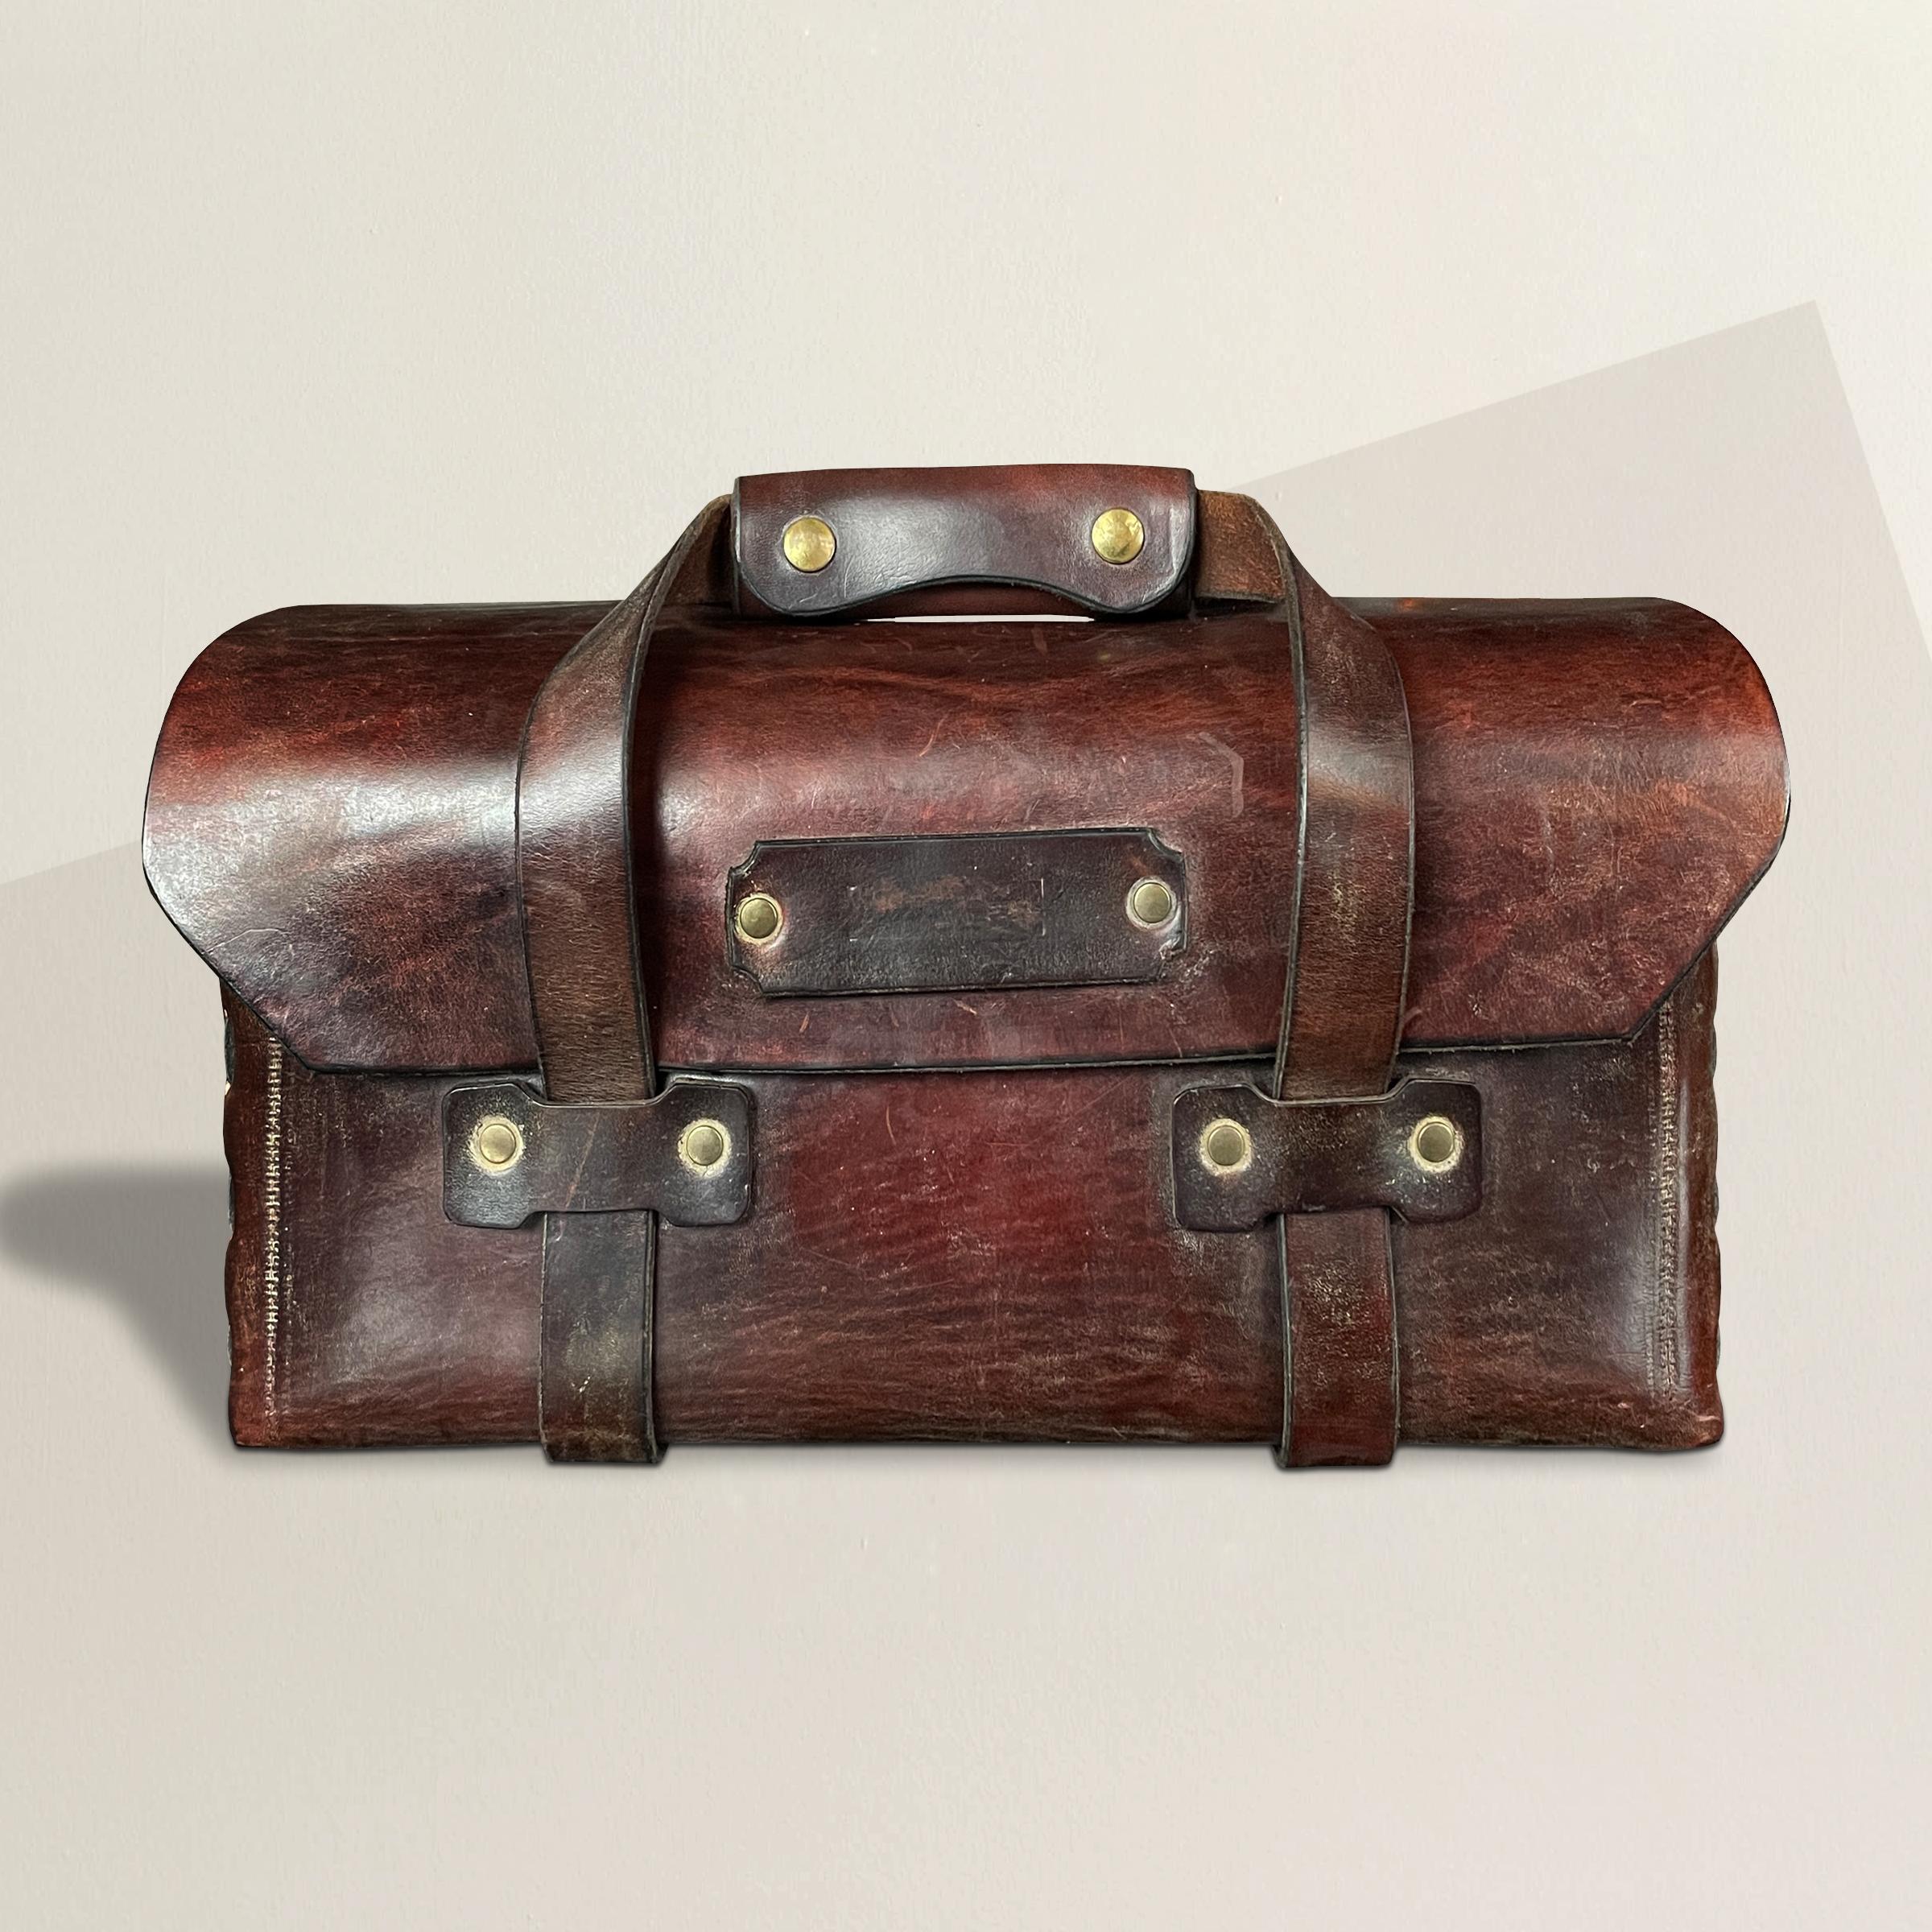 A wonderful mid-20th century American leather tool bag with two leather strap handles with brass snaps, and two elastic pockets inside. The perfect bag for the remotes on your coffee table, or anything else you might need to organize around your